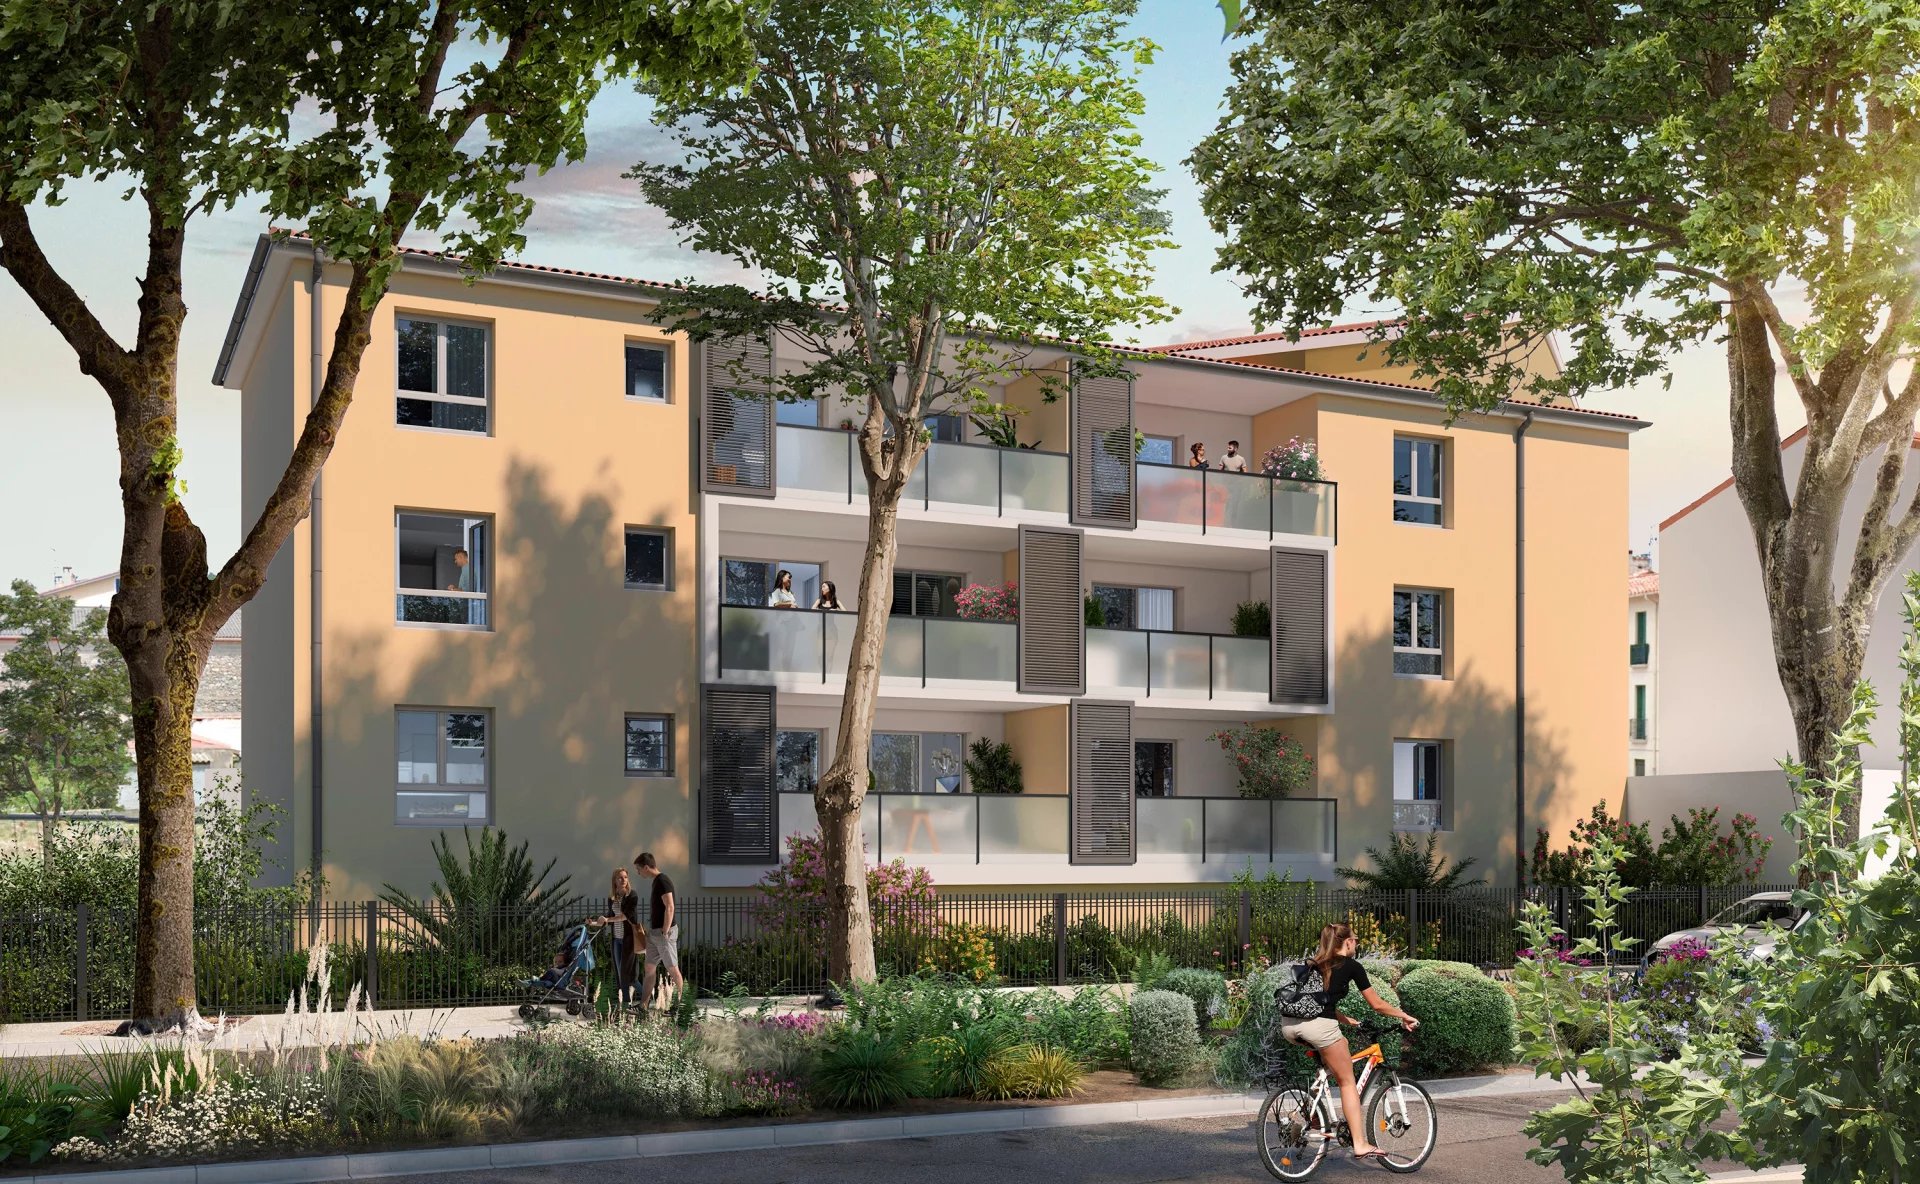 OFF-PLAN 1-BED APPARTMENT (LOT 305), RESIDENCE L'ANGLE DES ARTS, CERET